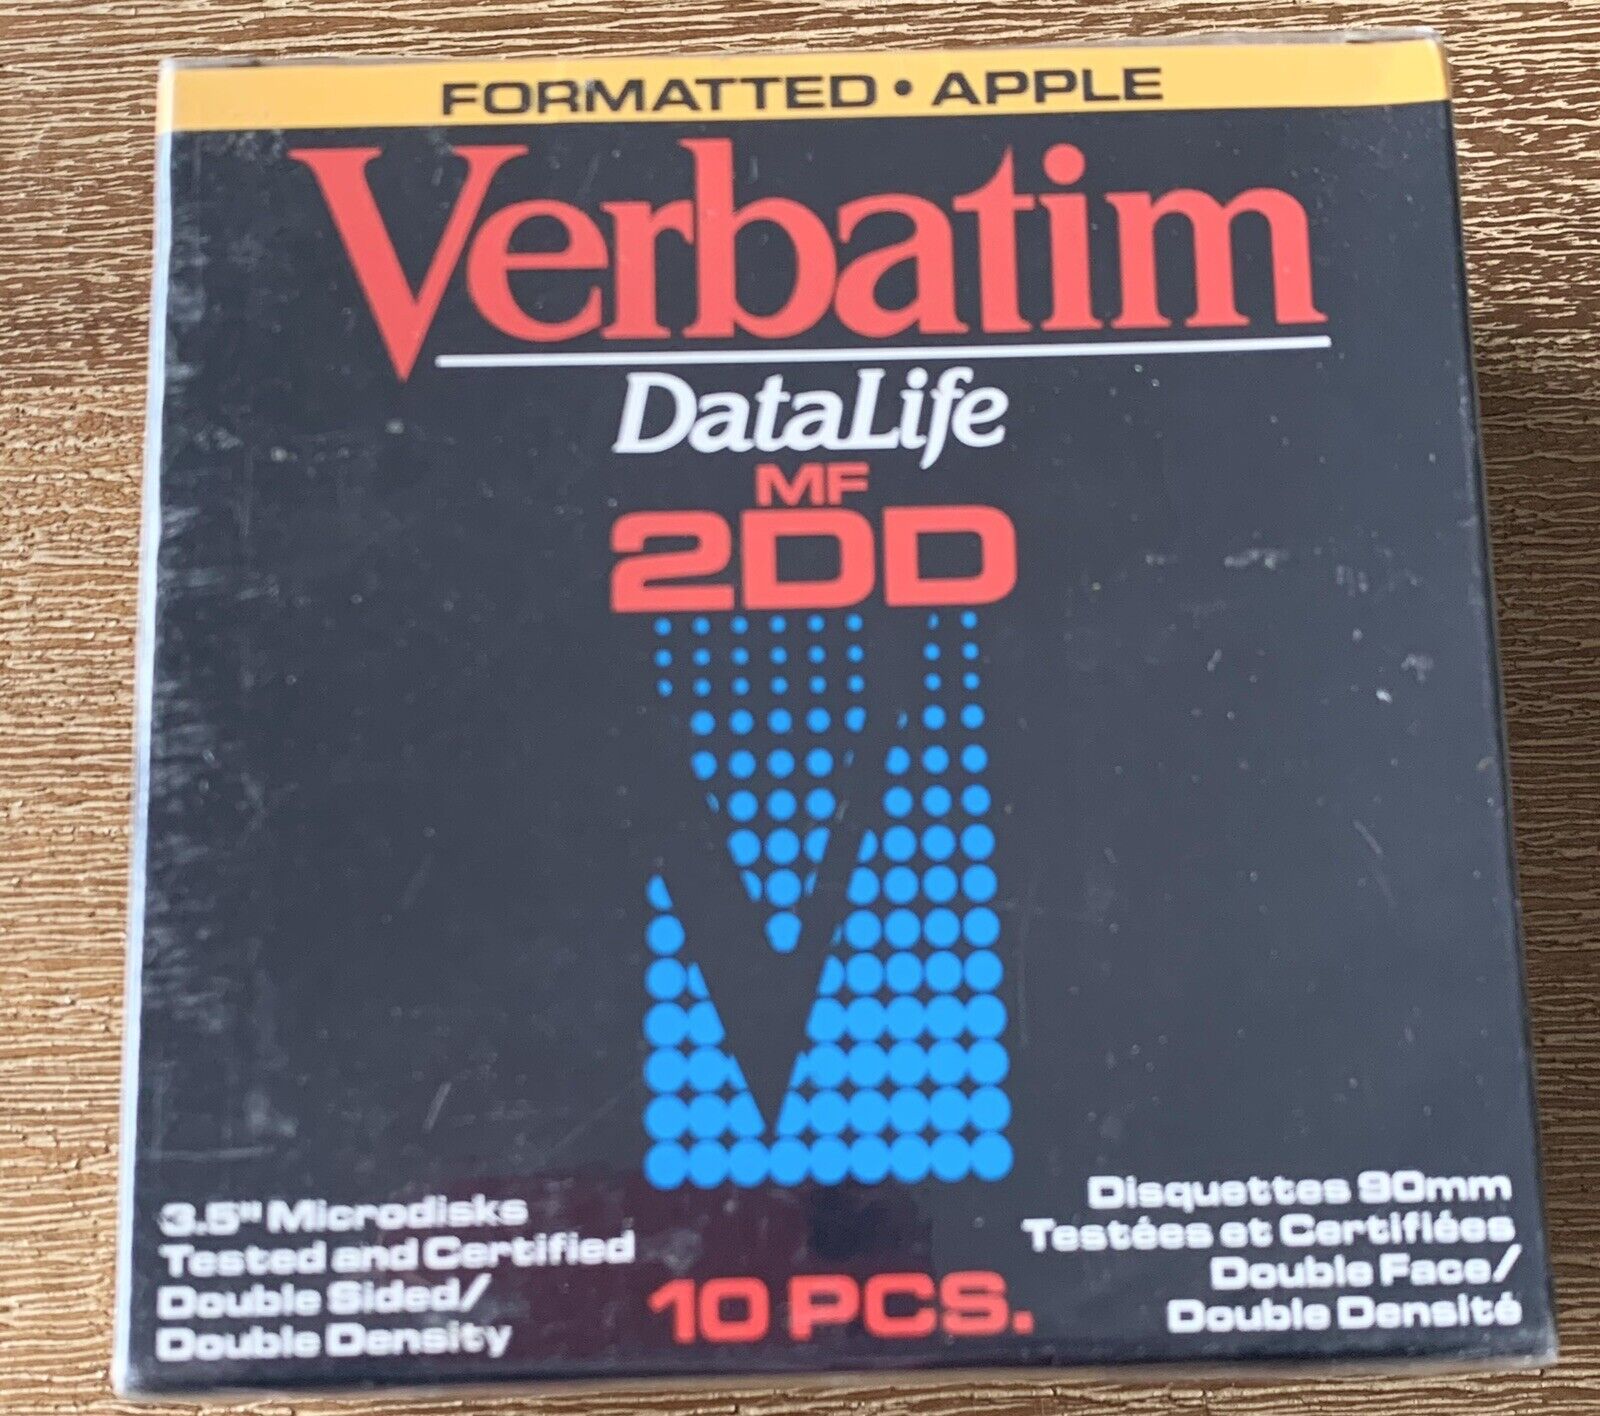 One Pack of 10 Formatted For Apple Verbatim Double Density 3.5